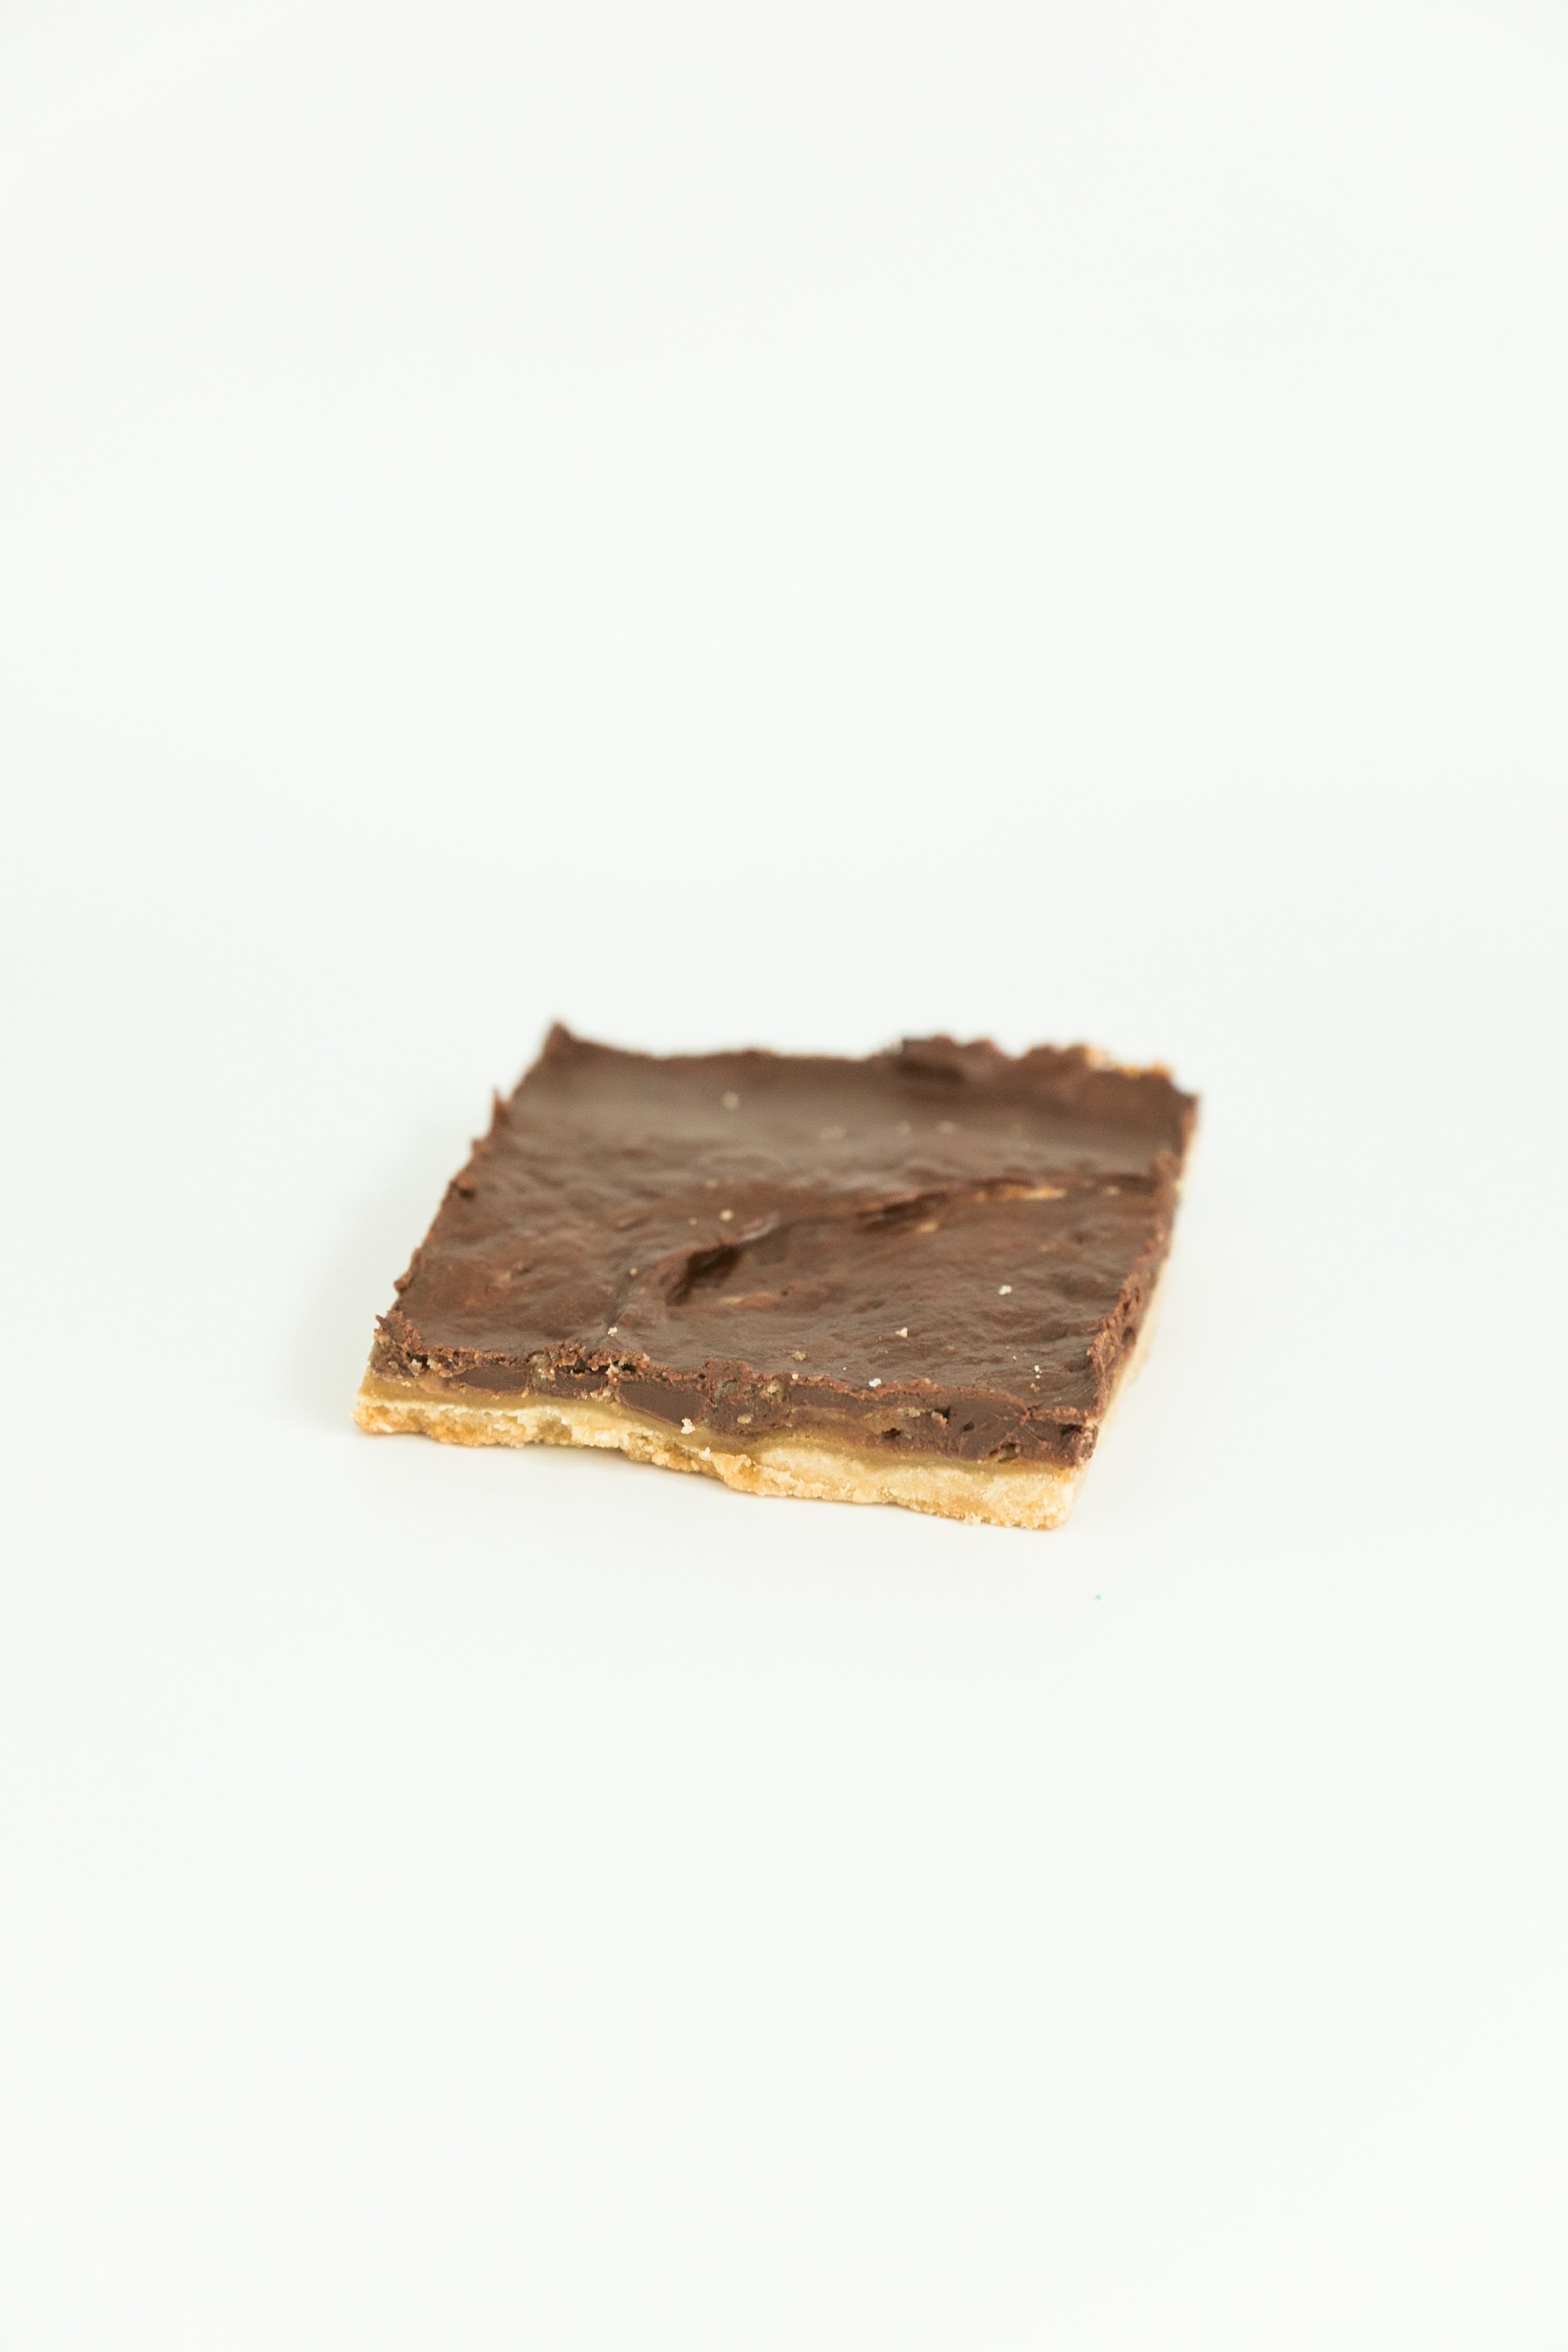  turtle bar is a mixture of shortbread, caramel and chocolate 